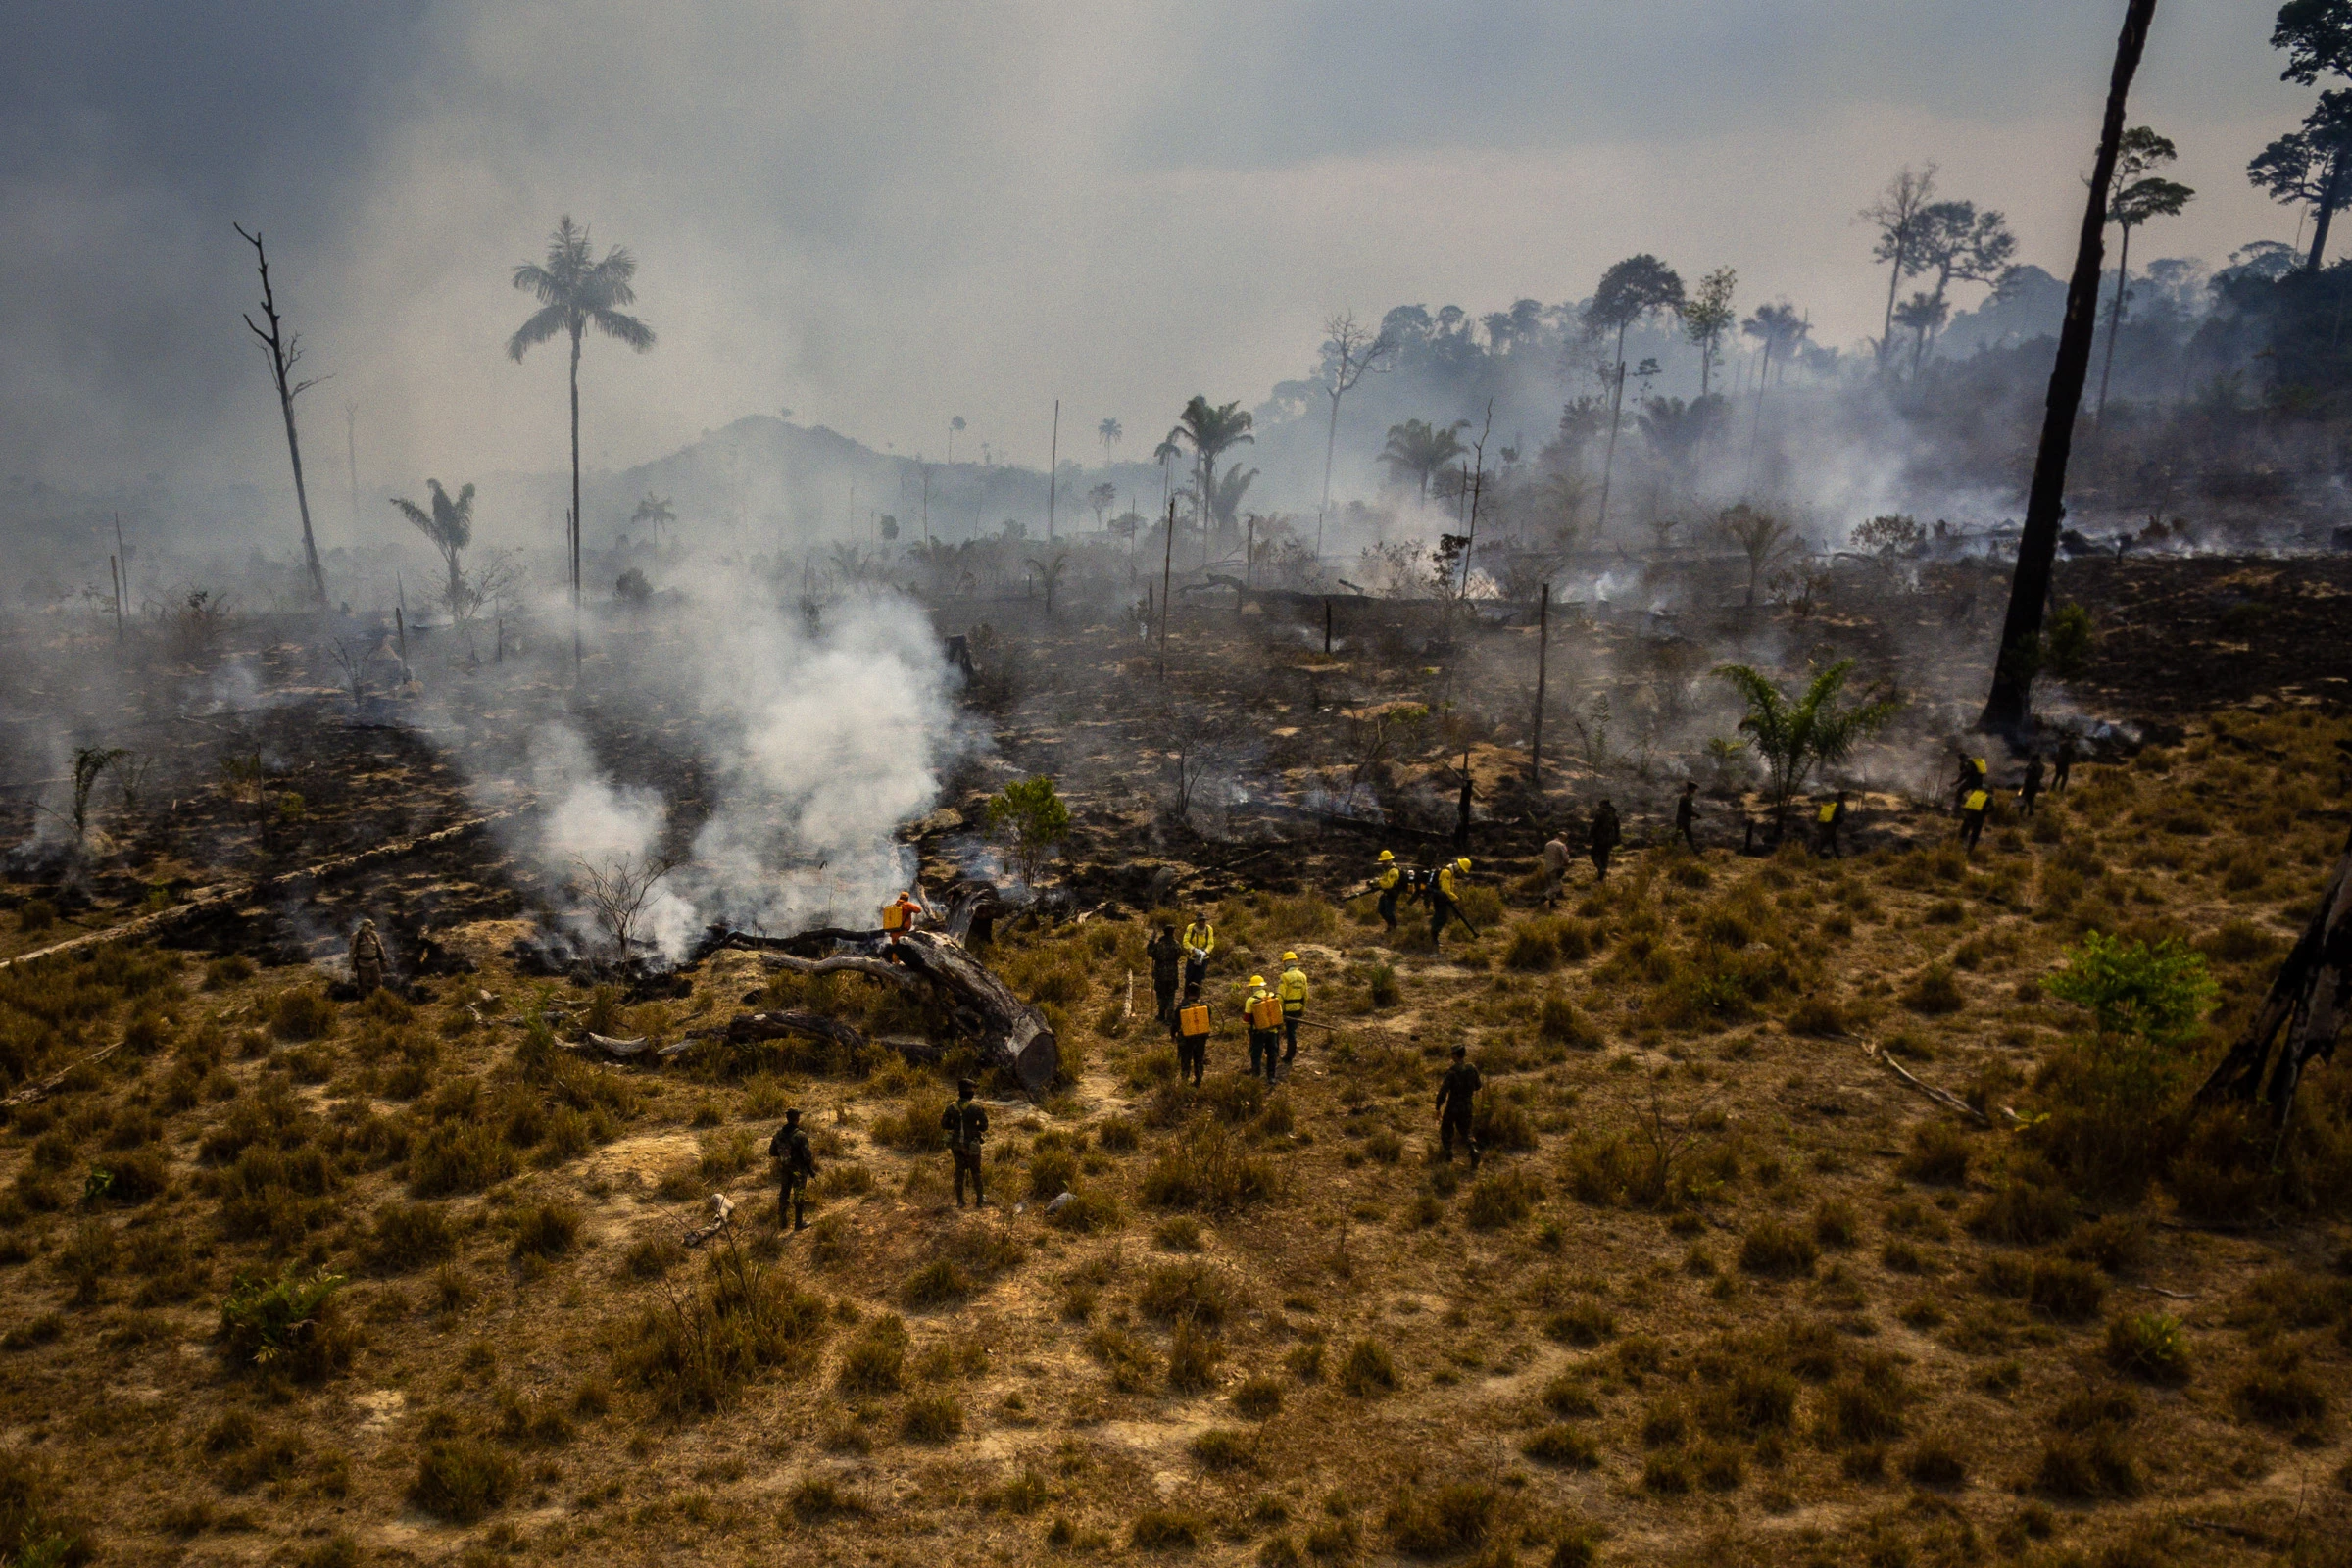 PARA, BRAZIL, 03/09/2019 -  Members of the IBAMA forest fire brigade (named Prevfogo) fight burning in the Amazon area of rural settlement PDS Nova Fronteira, in the city of Novo Progresso, Para state, northern Brazil, this Tuesday, September 3rd. Since the end of August Prevfogo has been acting with the assistance of Brazilian Army military. Bolsonaro government budget cuts since January 2019 have severely affected brigades, which have been reduced in critical regions such as the Amazon. (Photo by Gustavo Basso/NurPhoto via Getty Images)